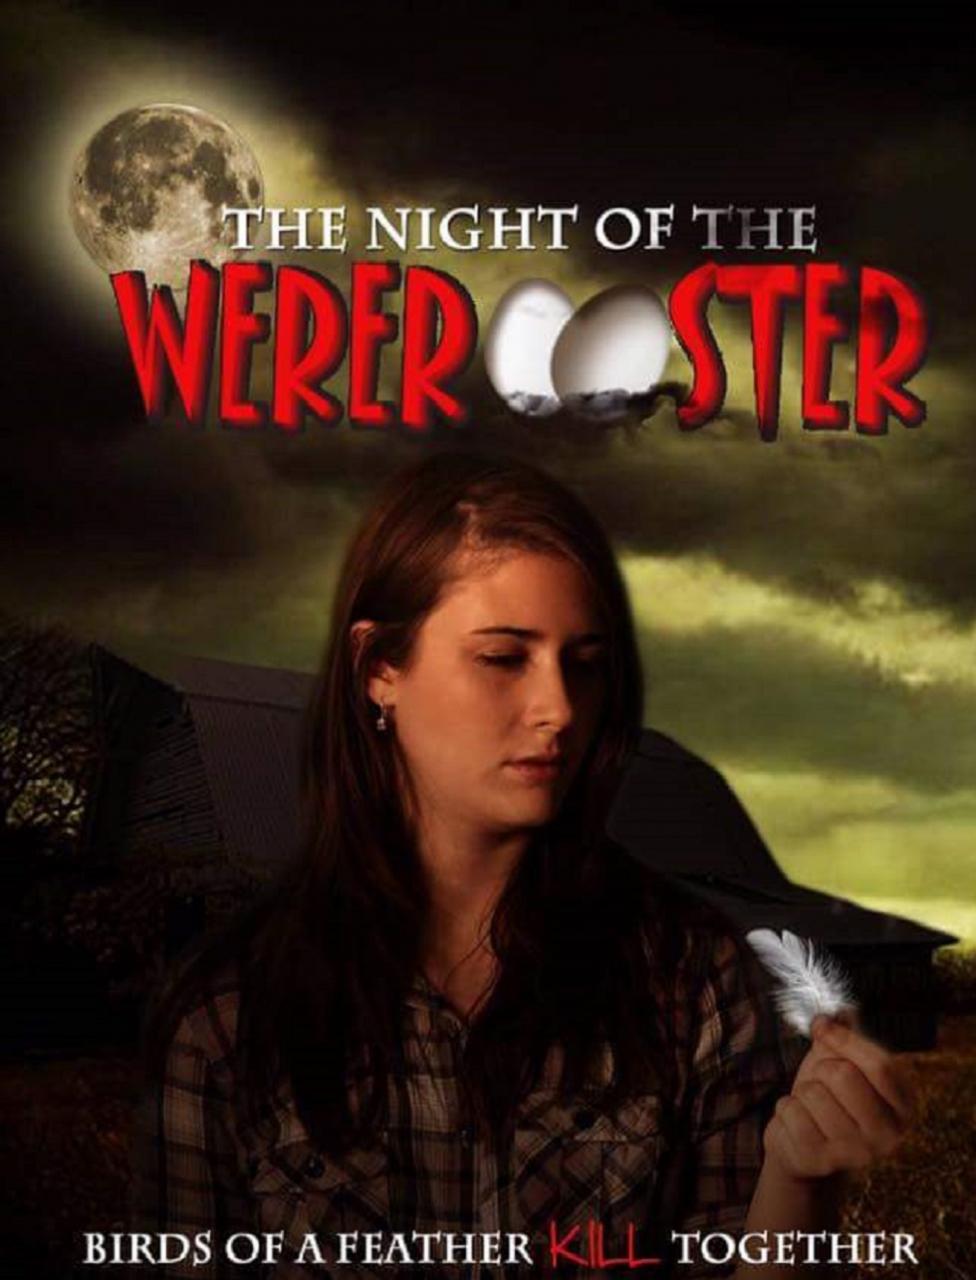 Night of the Wereroster